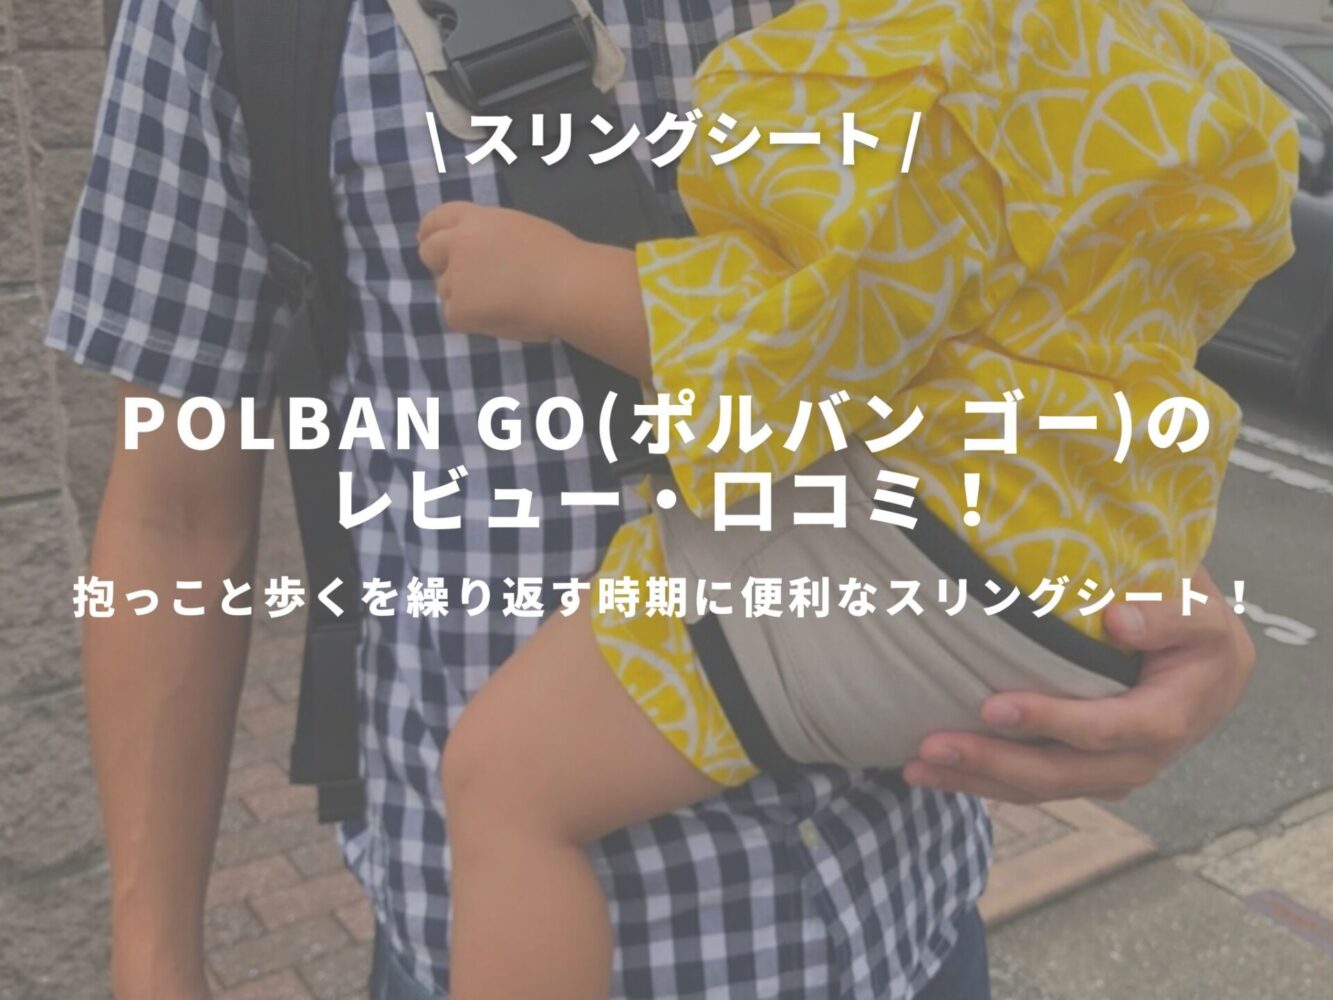 POLBAN GO(ポルバン ゴー)のアイキャッチ画像